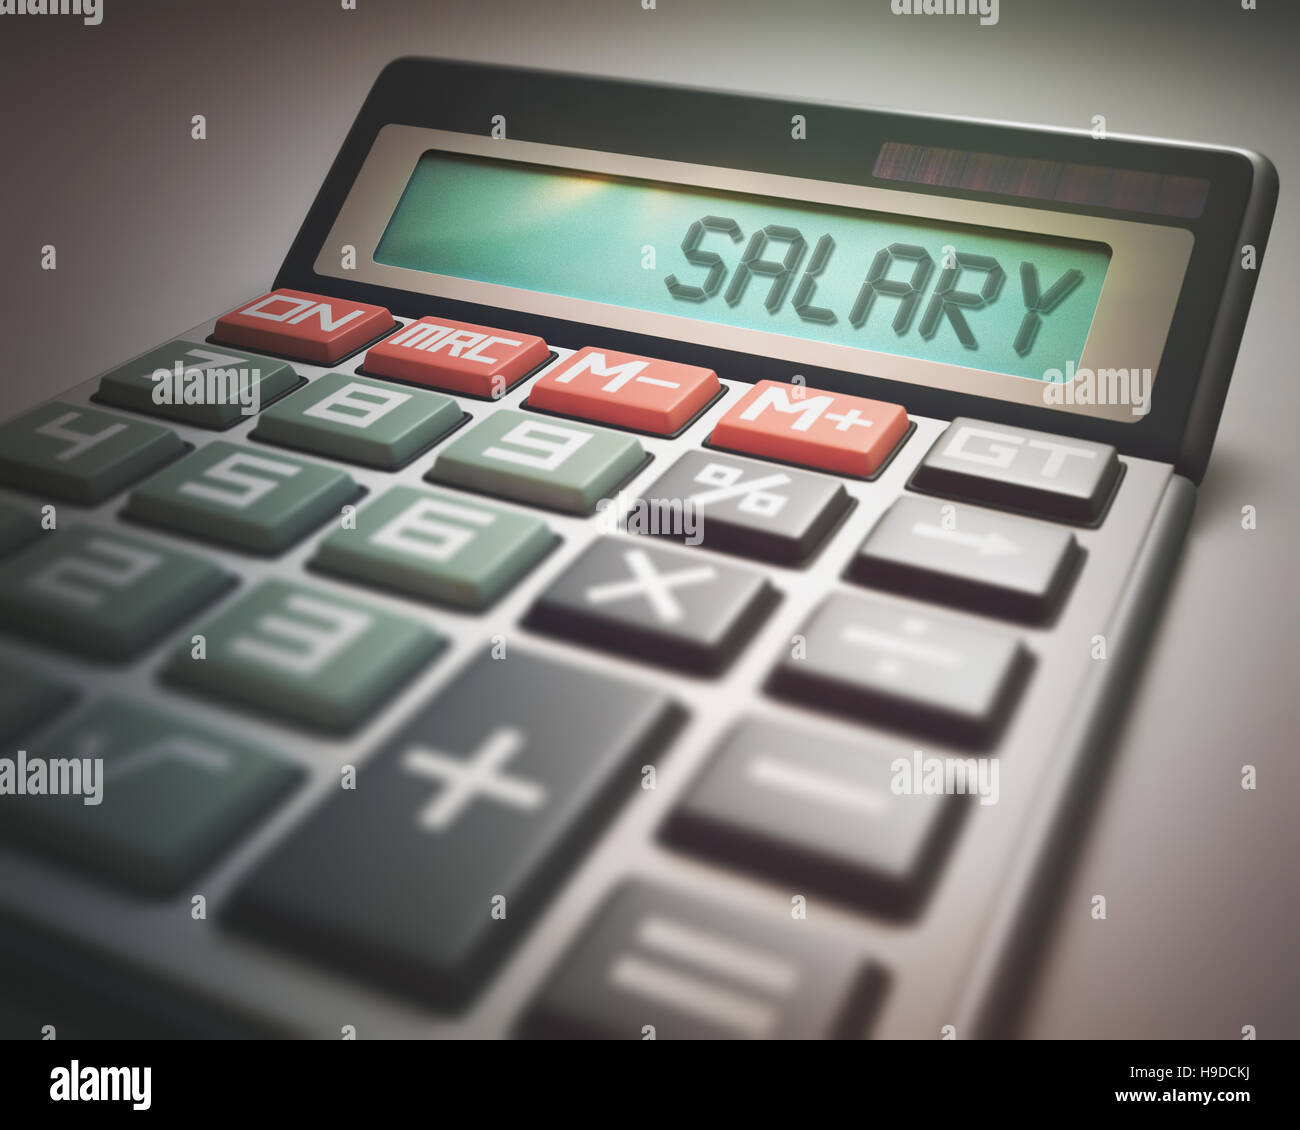 Solar calculator with the word SALARY on the display. 3D illustration, concept image of Business and Finance. Stock Photo